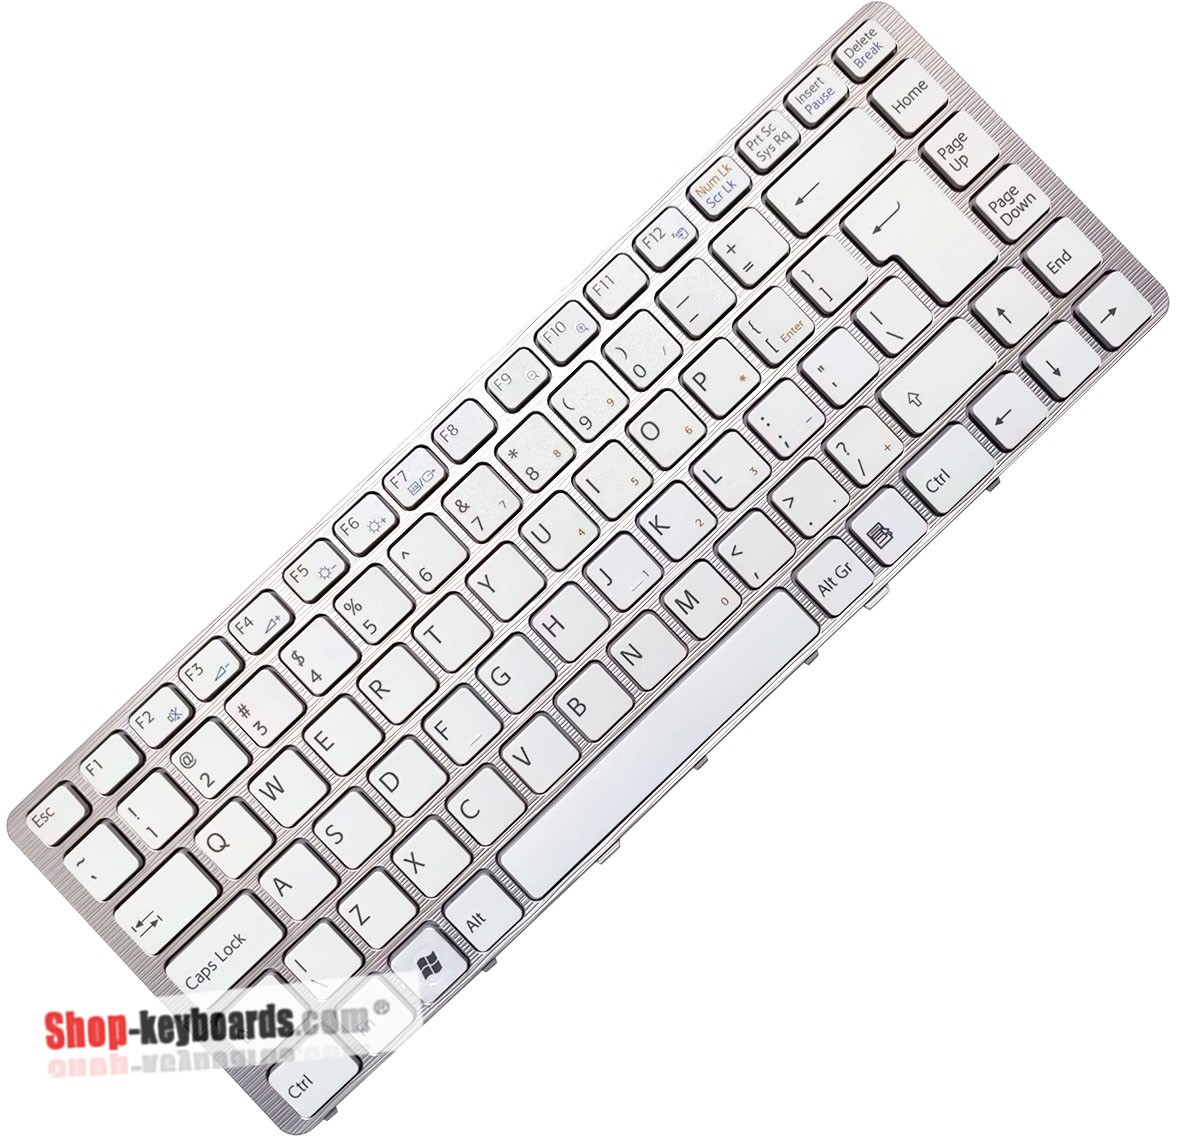 Sony 148738381 Keyboard replacement